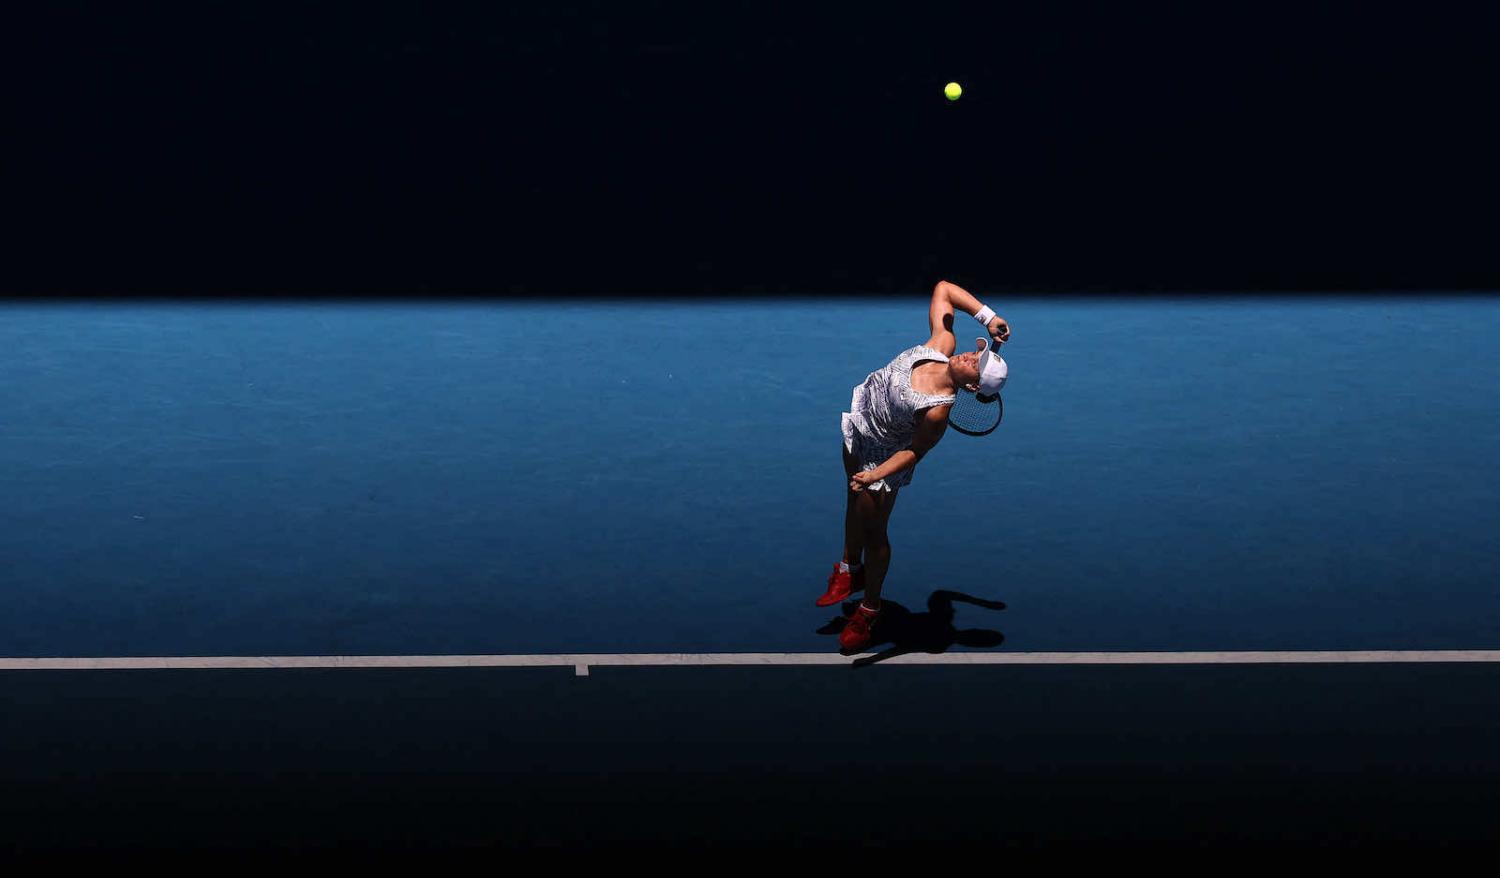 World number one Ashleigh Barty on her way to winning the 2022 Australian Open tennis (Martin Keep/AFP via Getty Images)